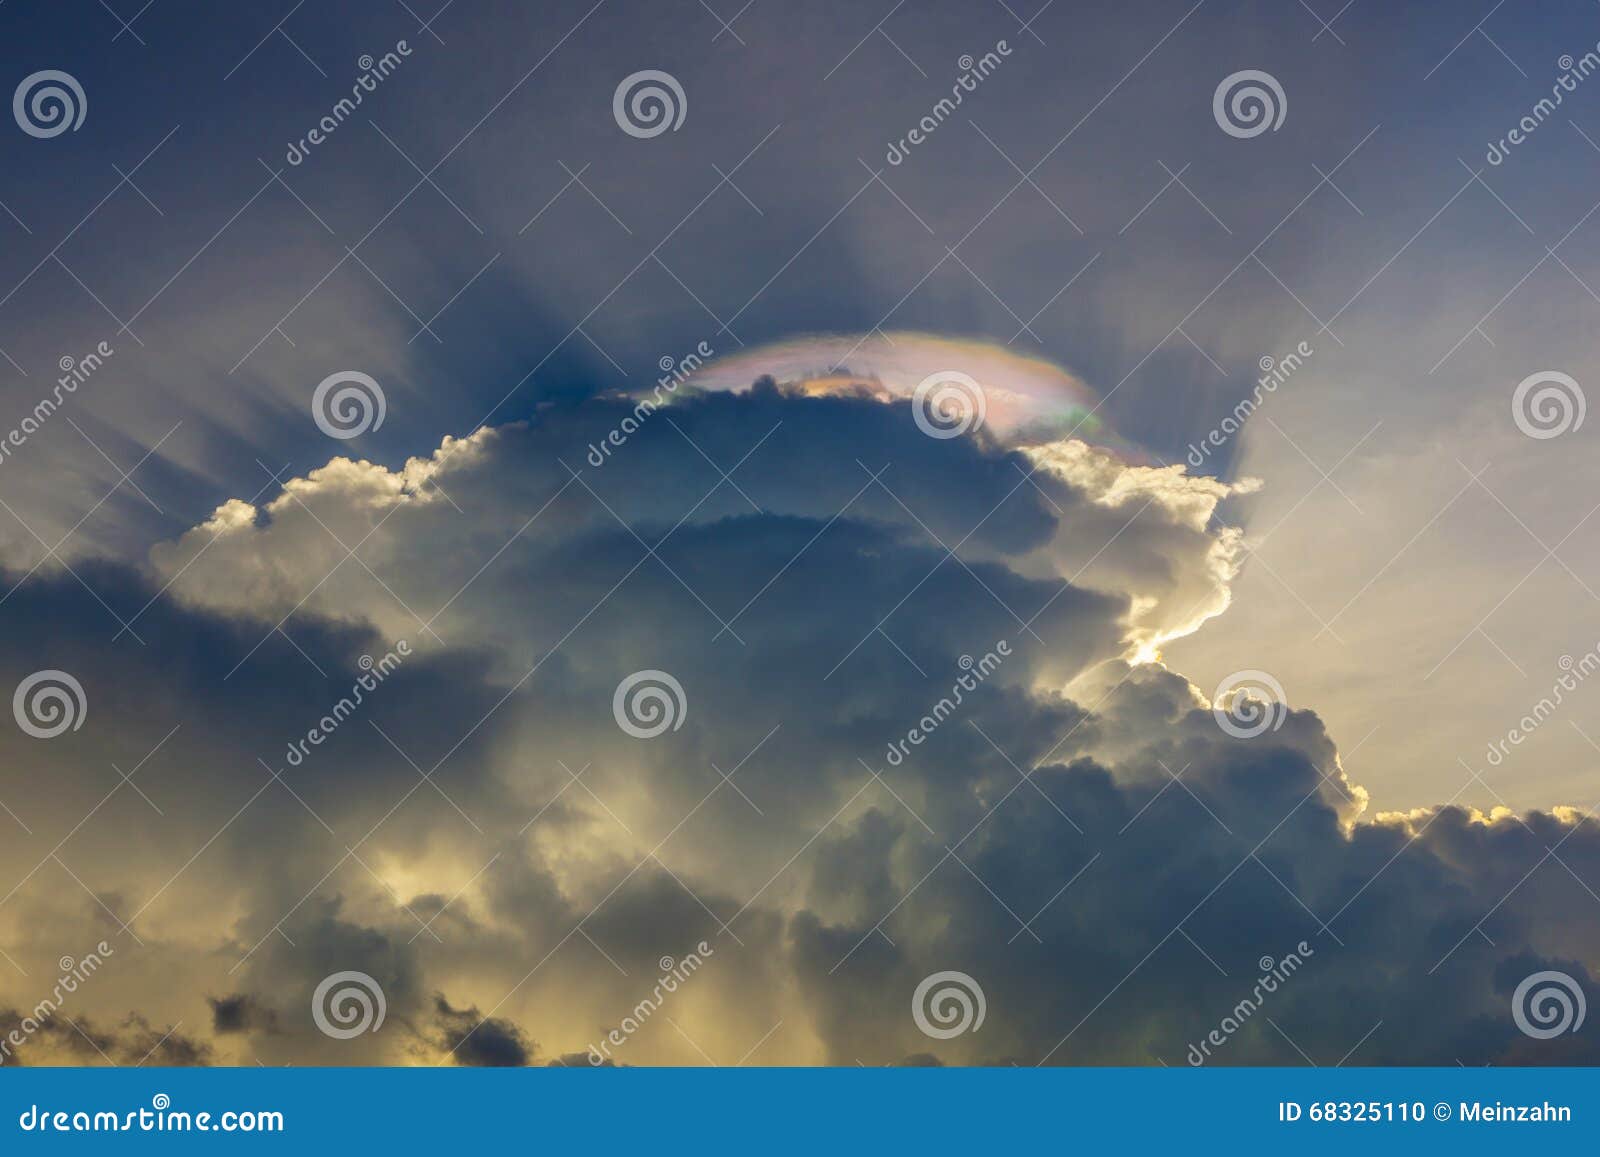 sky with clouds and colorful prisma light reflections